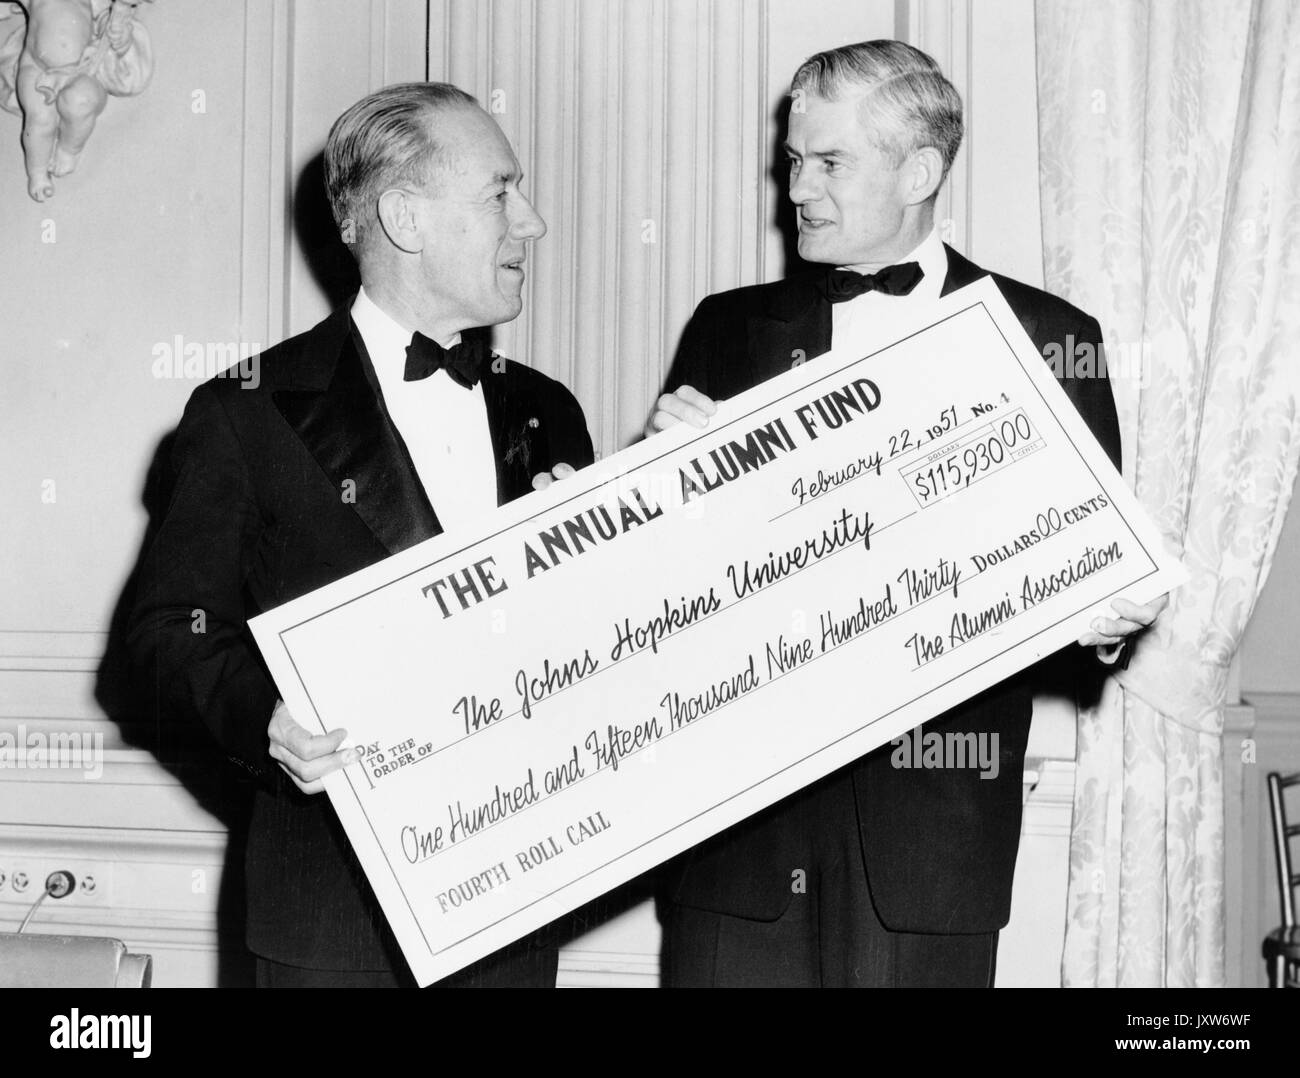 Detlev Wulf Bronk, Candid photograph, Standing, Hips up, Profile, Holding facsimile of check for Annual Alumni Fund, 1951. Stock Photo